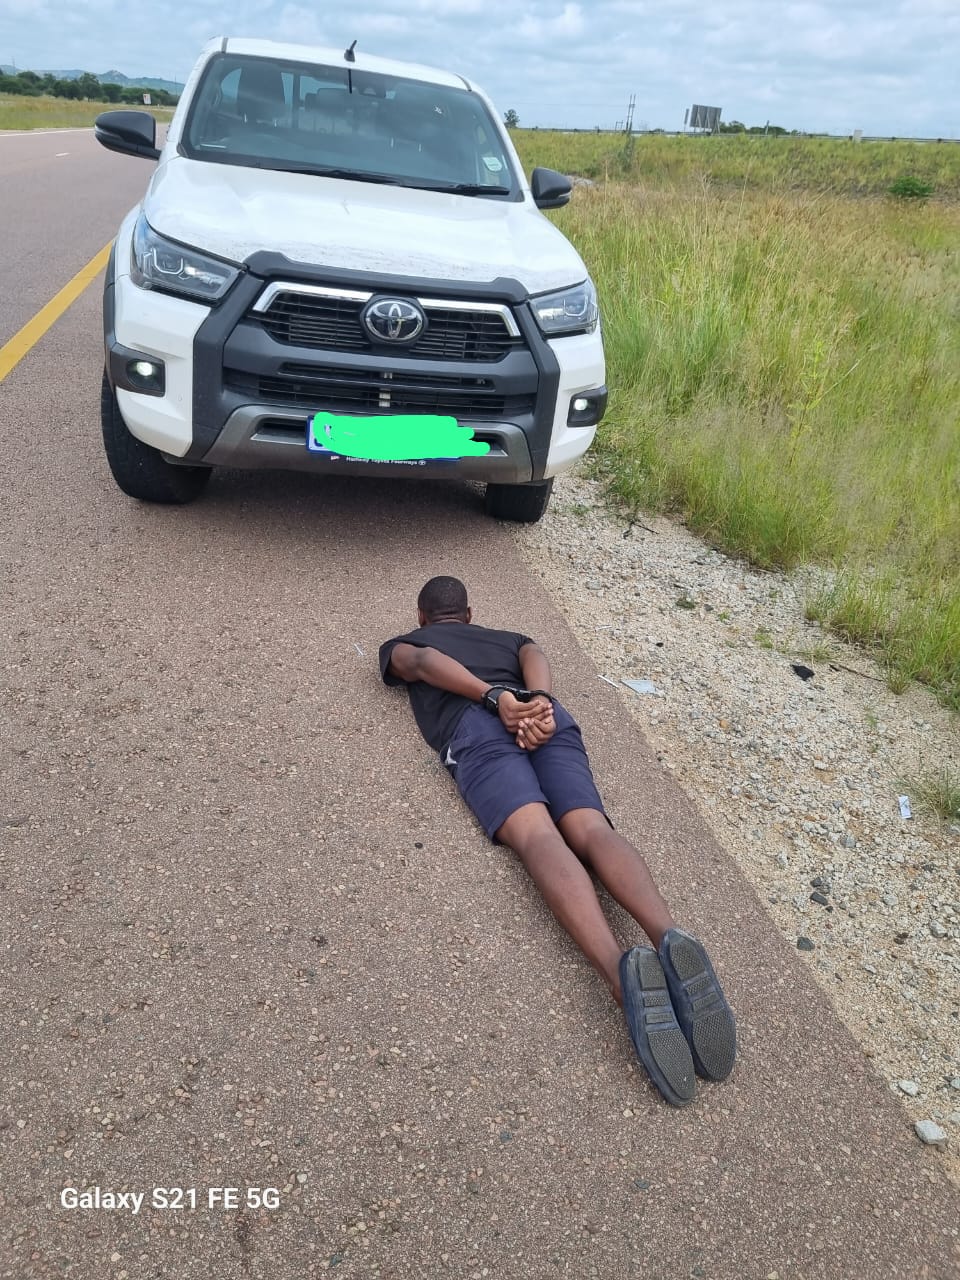 POLICE ARREST SUSPECT FOR POSSESSION OF STOLEN VEHICLE ALLEGEDLY ENROUTE TO BE SMUGGLED THROUGH BEITBRIGE BORDER POST